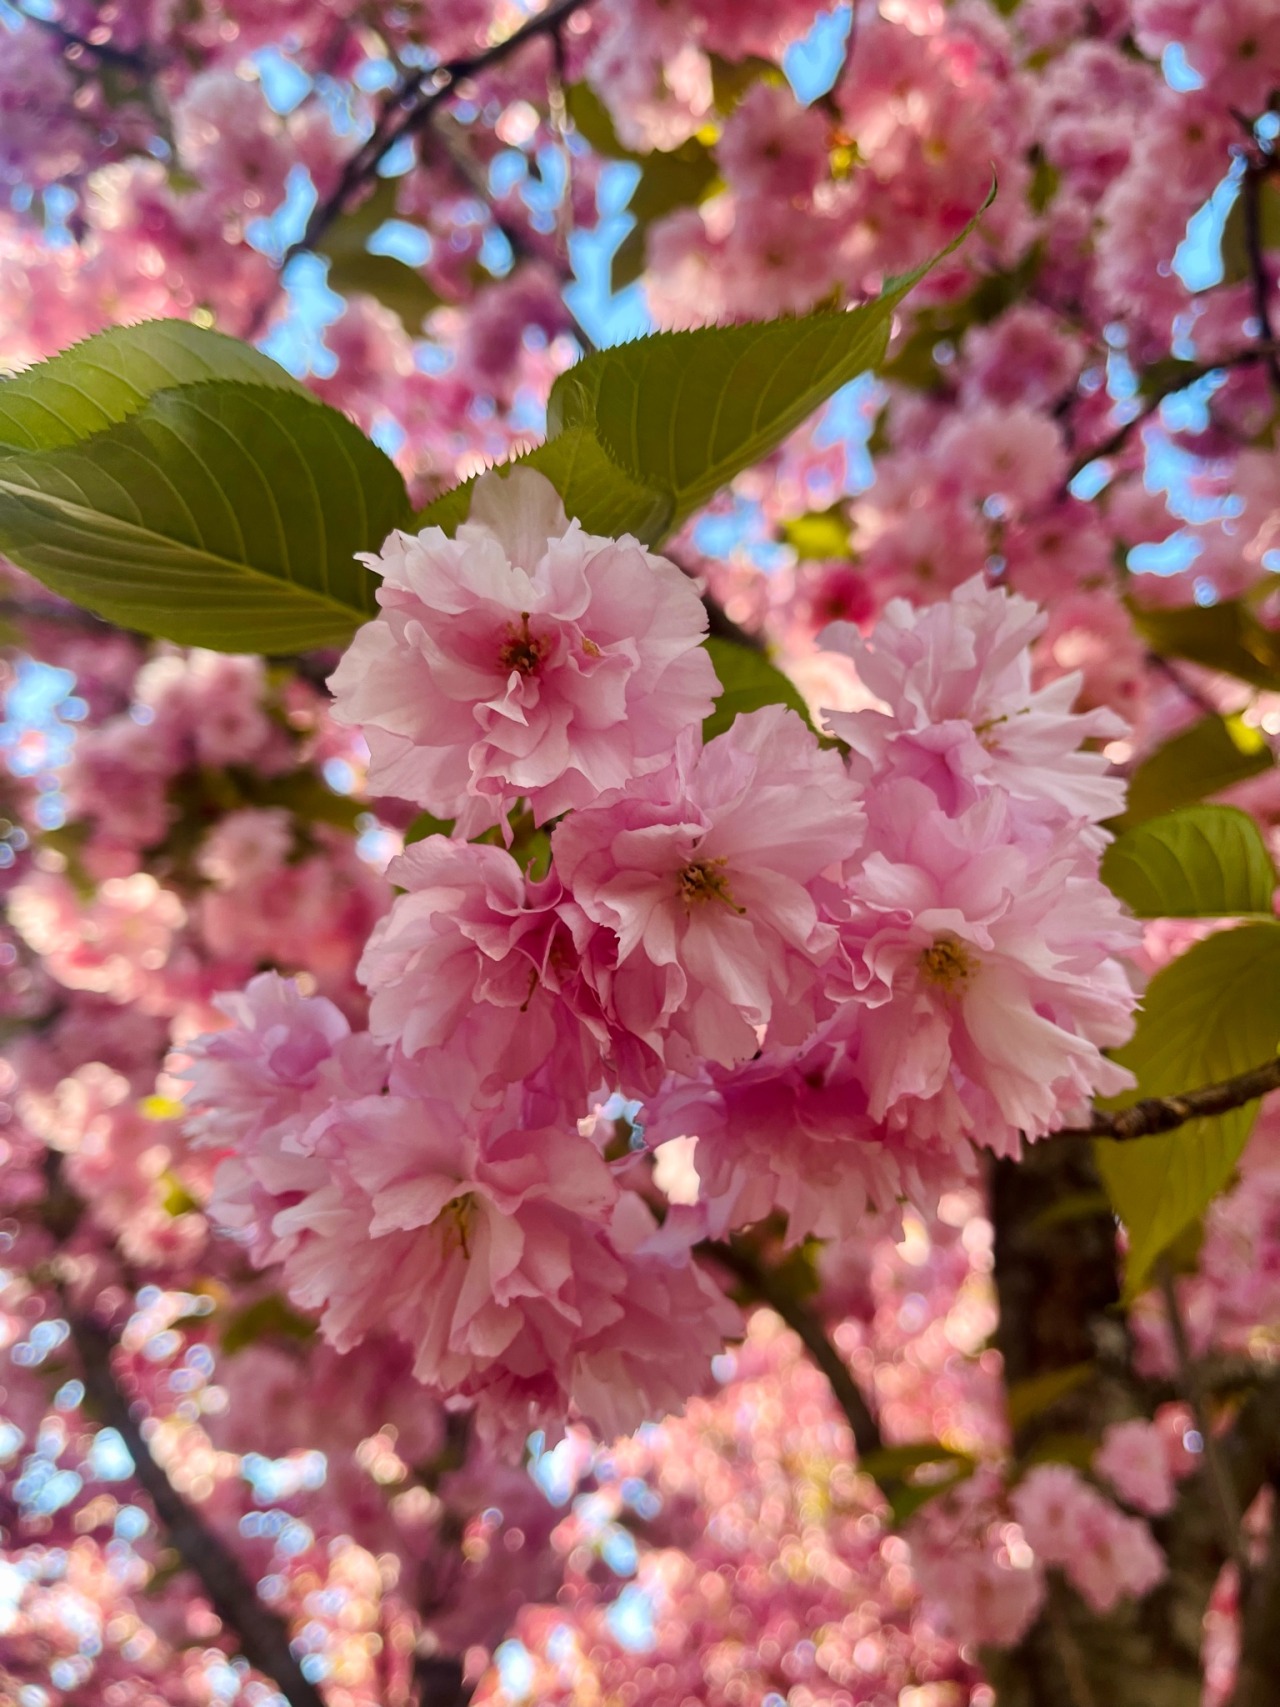 a close up photo of a cluster of pale pink cherry blossoms with bright green leaves framing the blooms